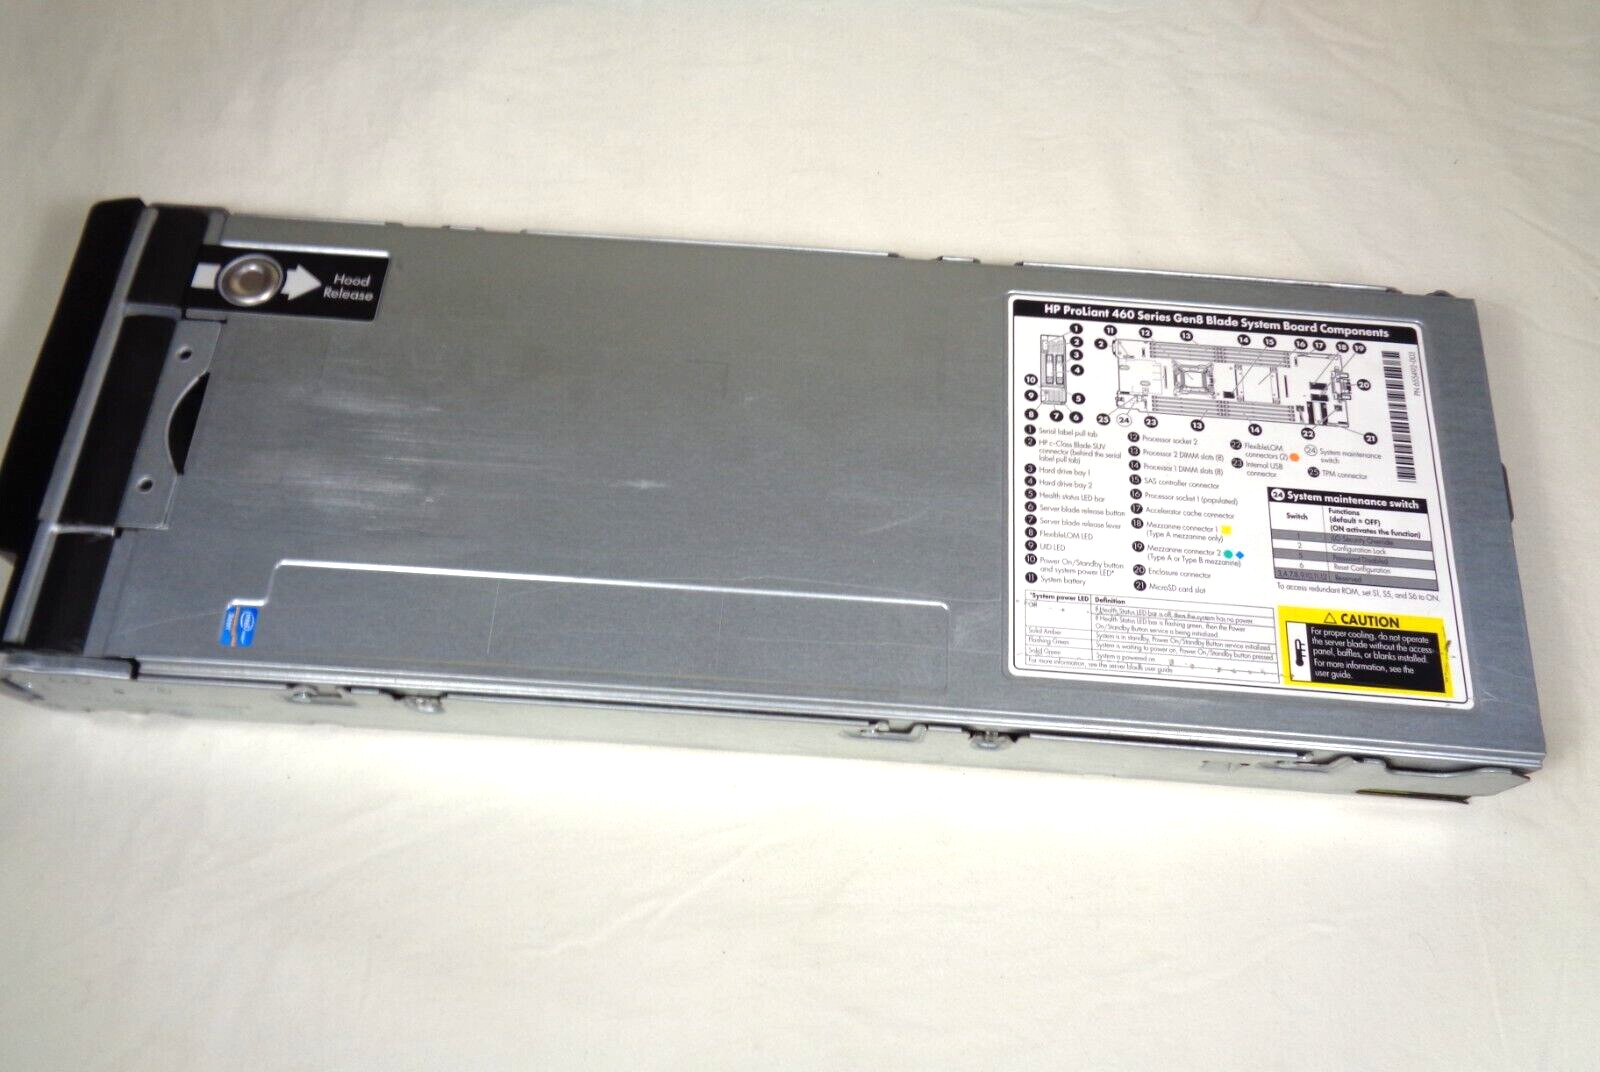 HP ProLiant BL460c Gen8 Blade Server was in use and removed in working condition